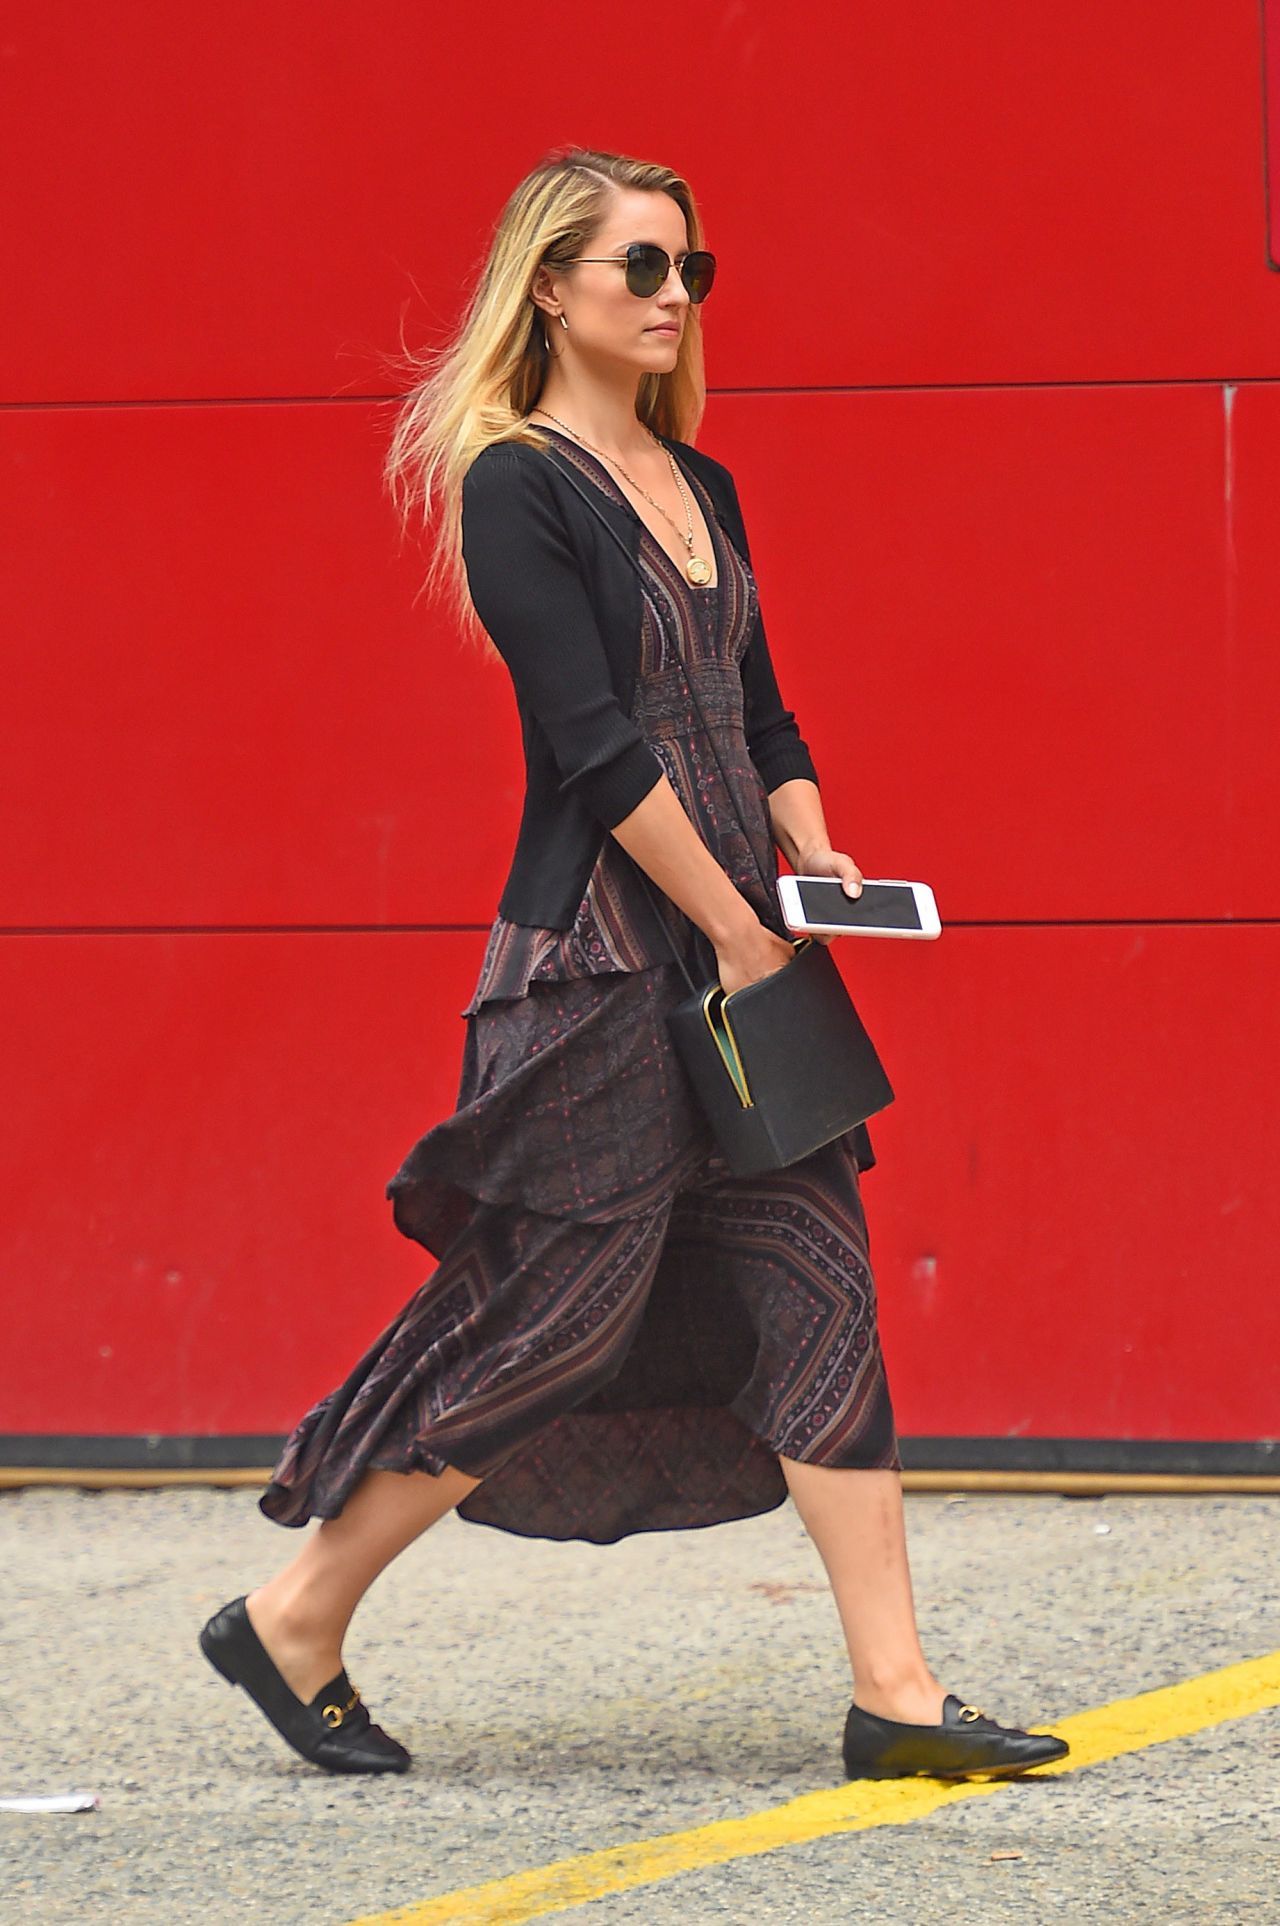 dianna-agron-out-in-new-york-city-06-28-2018-6.jpg